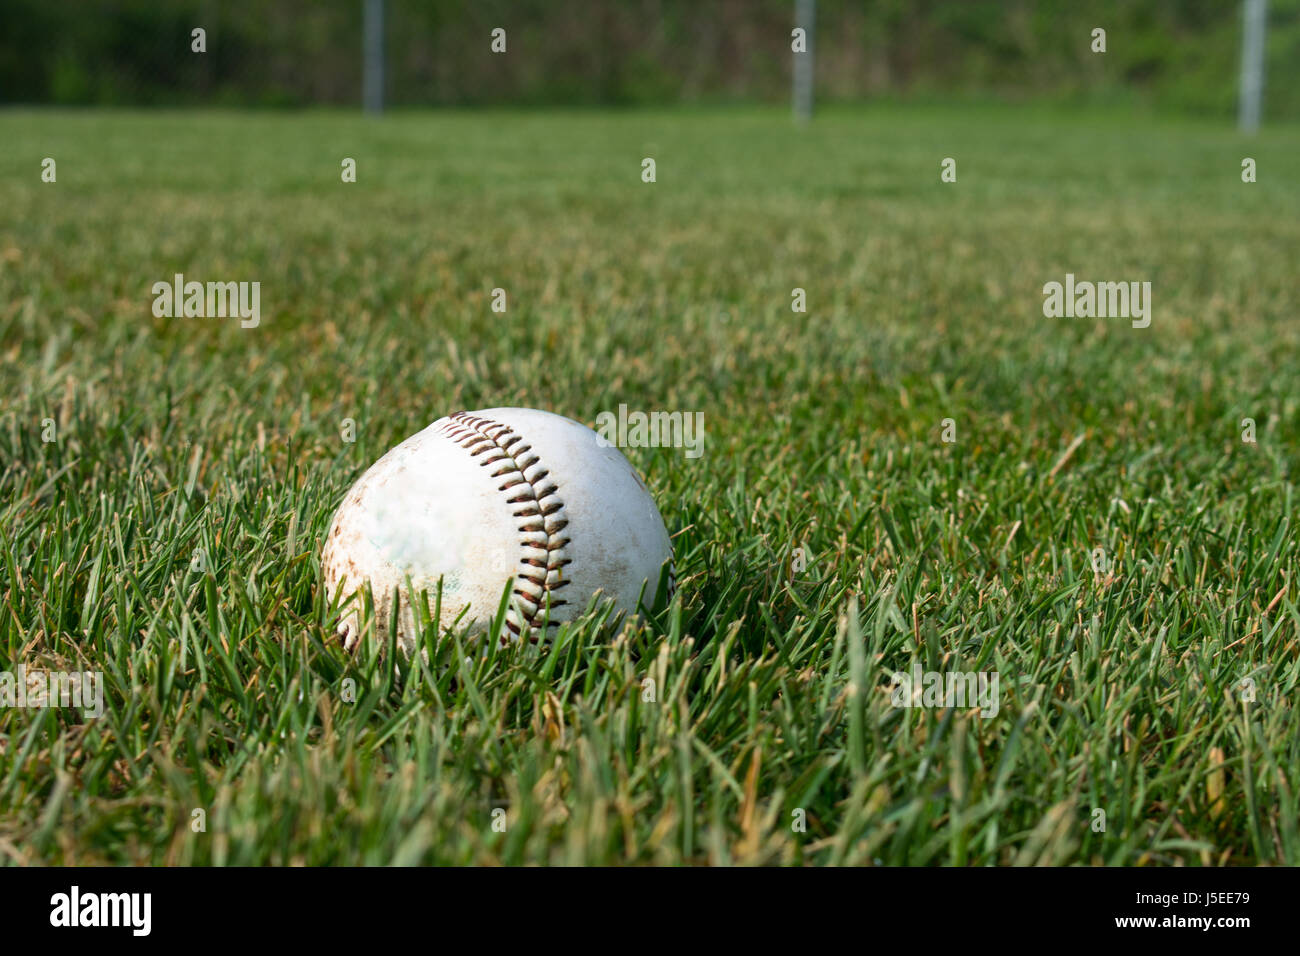 A baseball waiting play on the field. Stock Photo